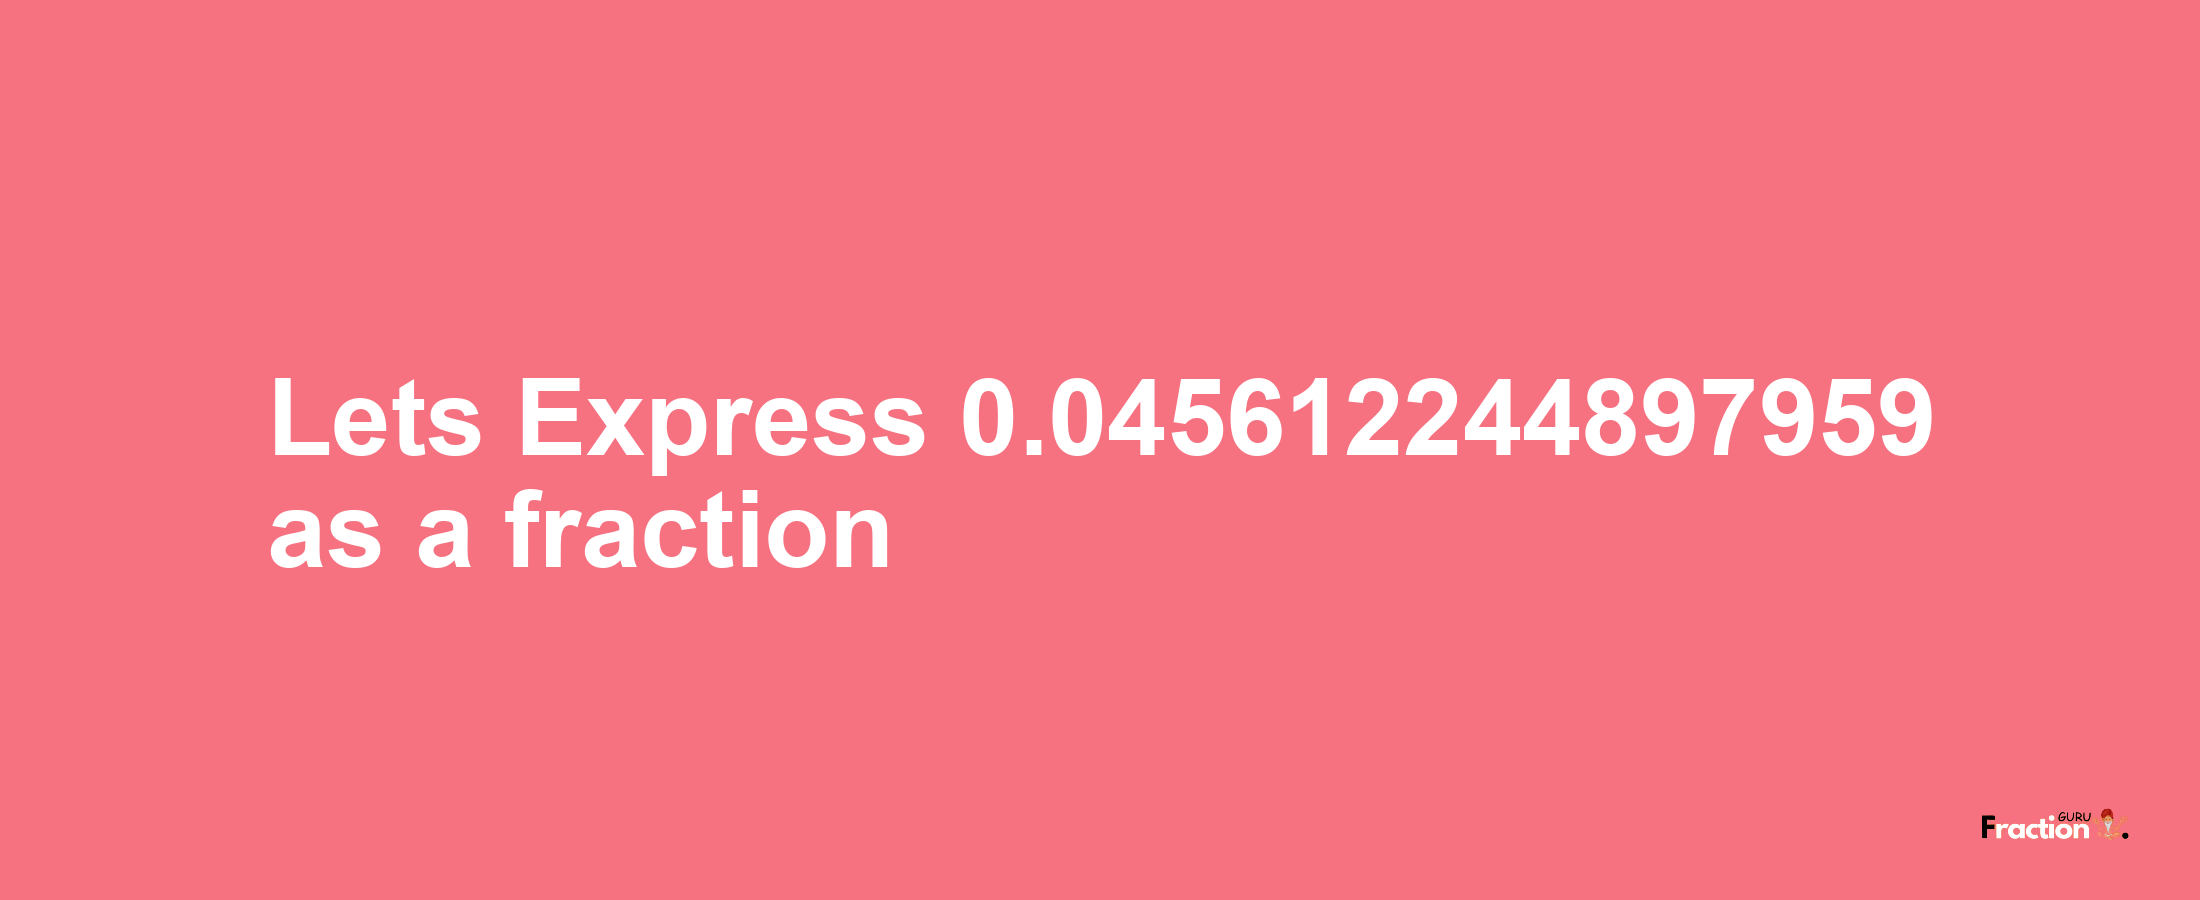 Lets Express 0.045612244897959 as afraction